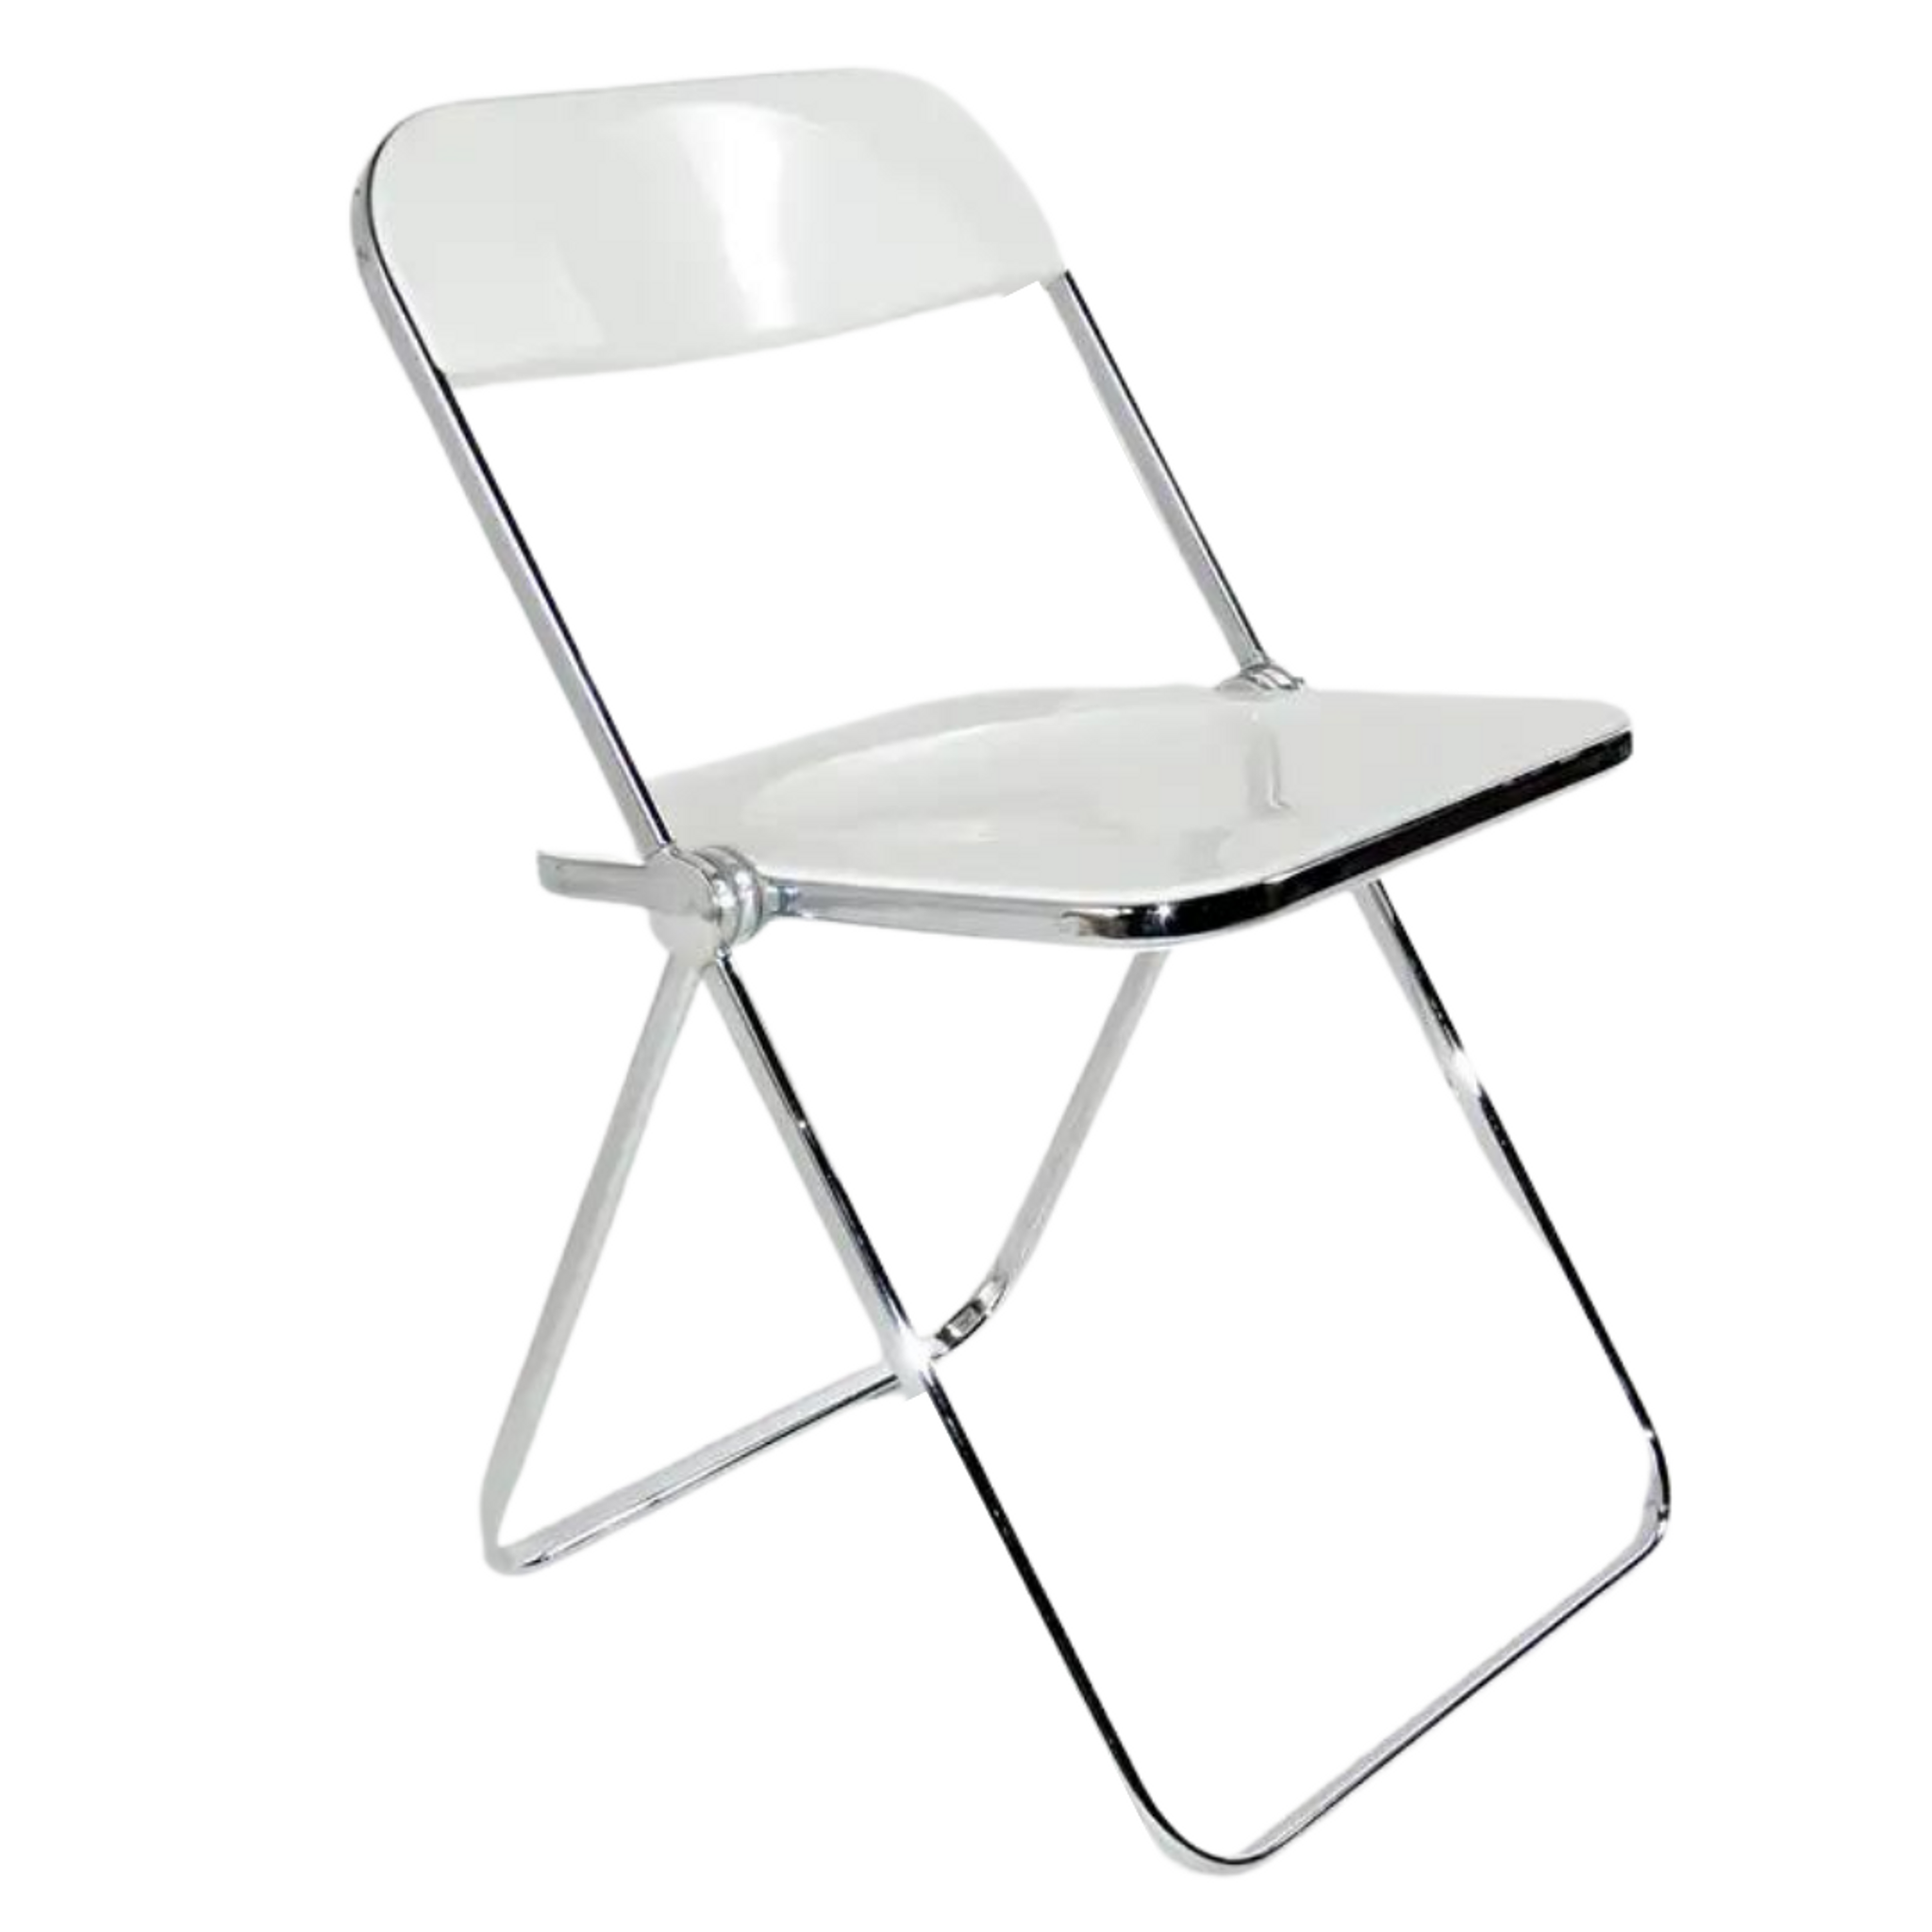 Acrylic Folding Chair with Chrome Trim and Matching Work Table